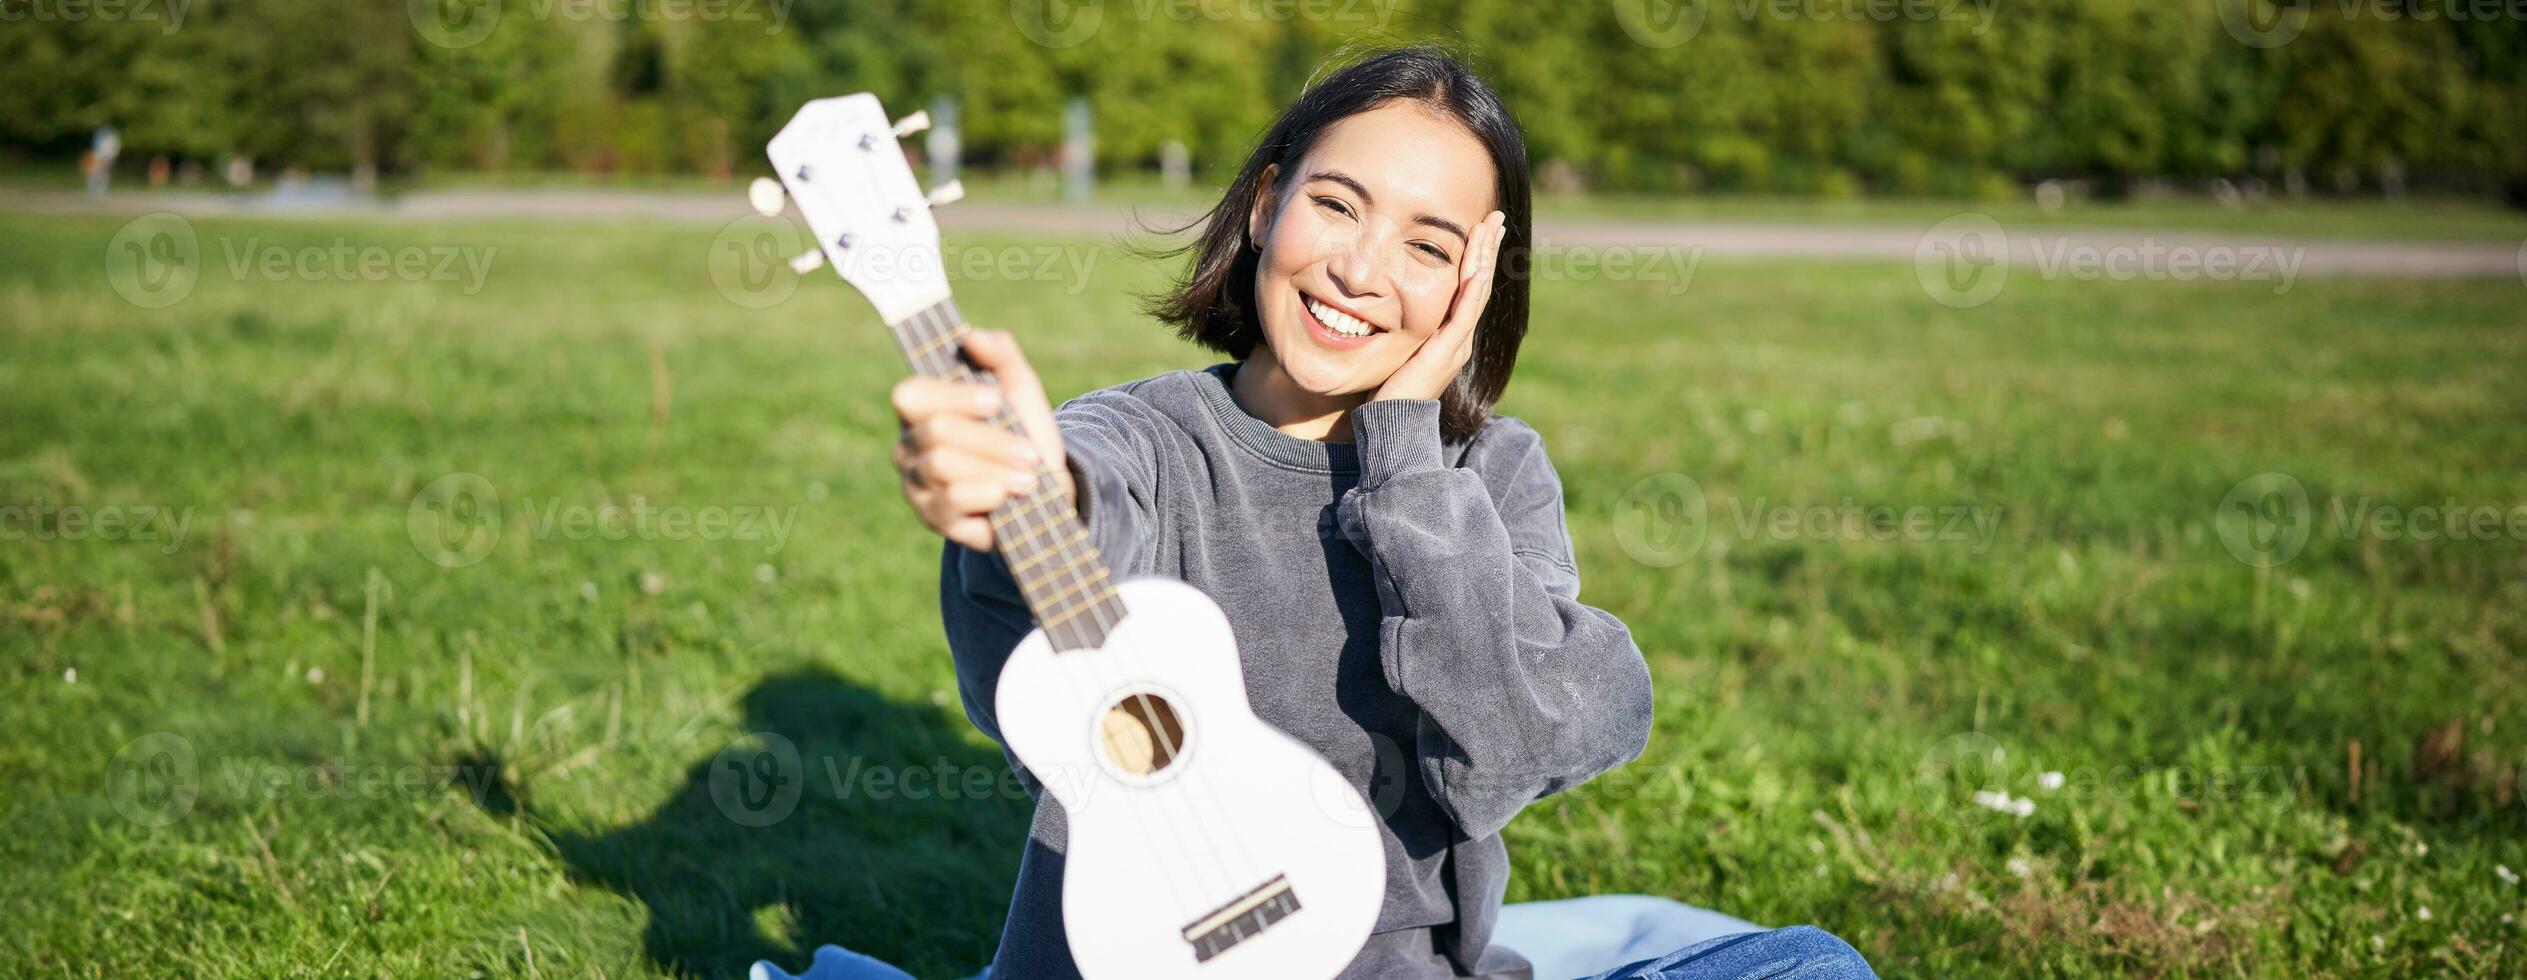 Beautiful asian girl with happy smile, shows her ukulele, sits outside in park on grass, relaxes with music photo